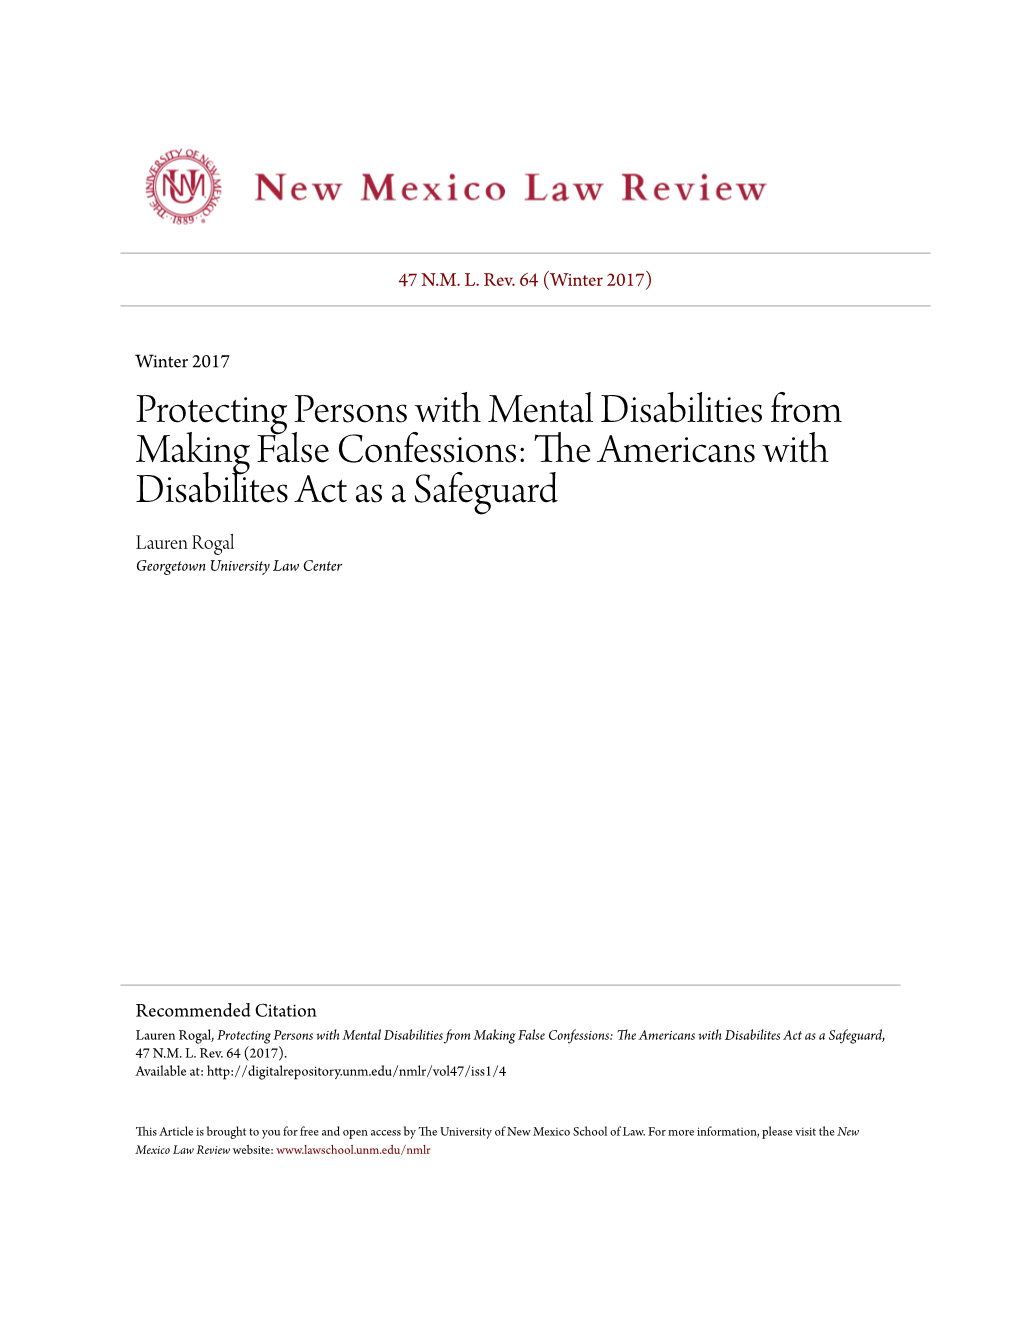 Protecting Persons with Mental Disabilities from Making False